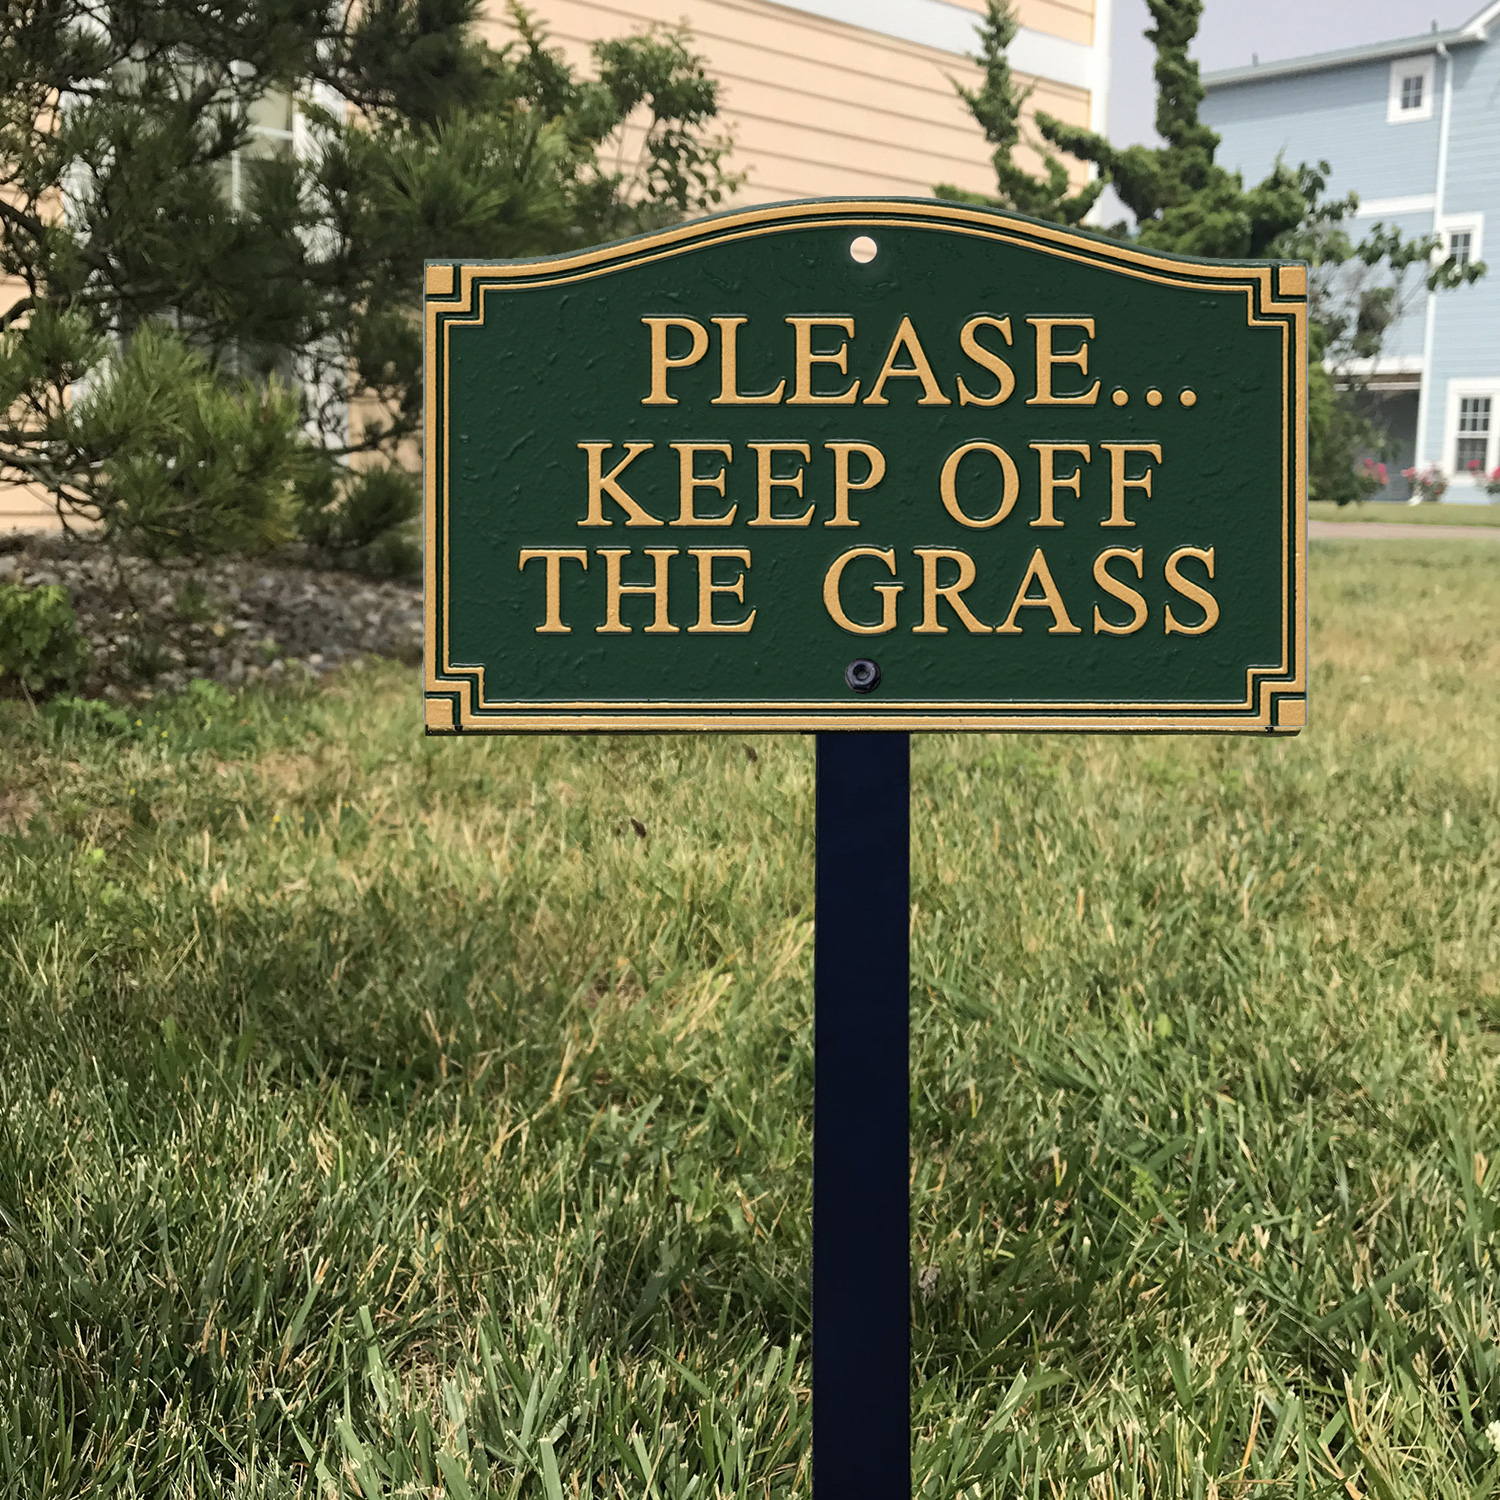 GONEI Aluminum Please Keep Off Grass in This Area Needs to Recover Sign Warning Signs 8 x 12 Inches Aluminum Warning Metal Signs Indoor or Outdoor Use for Home Business UV Protected & Waterproof